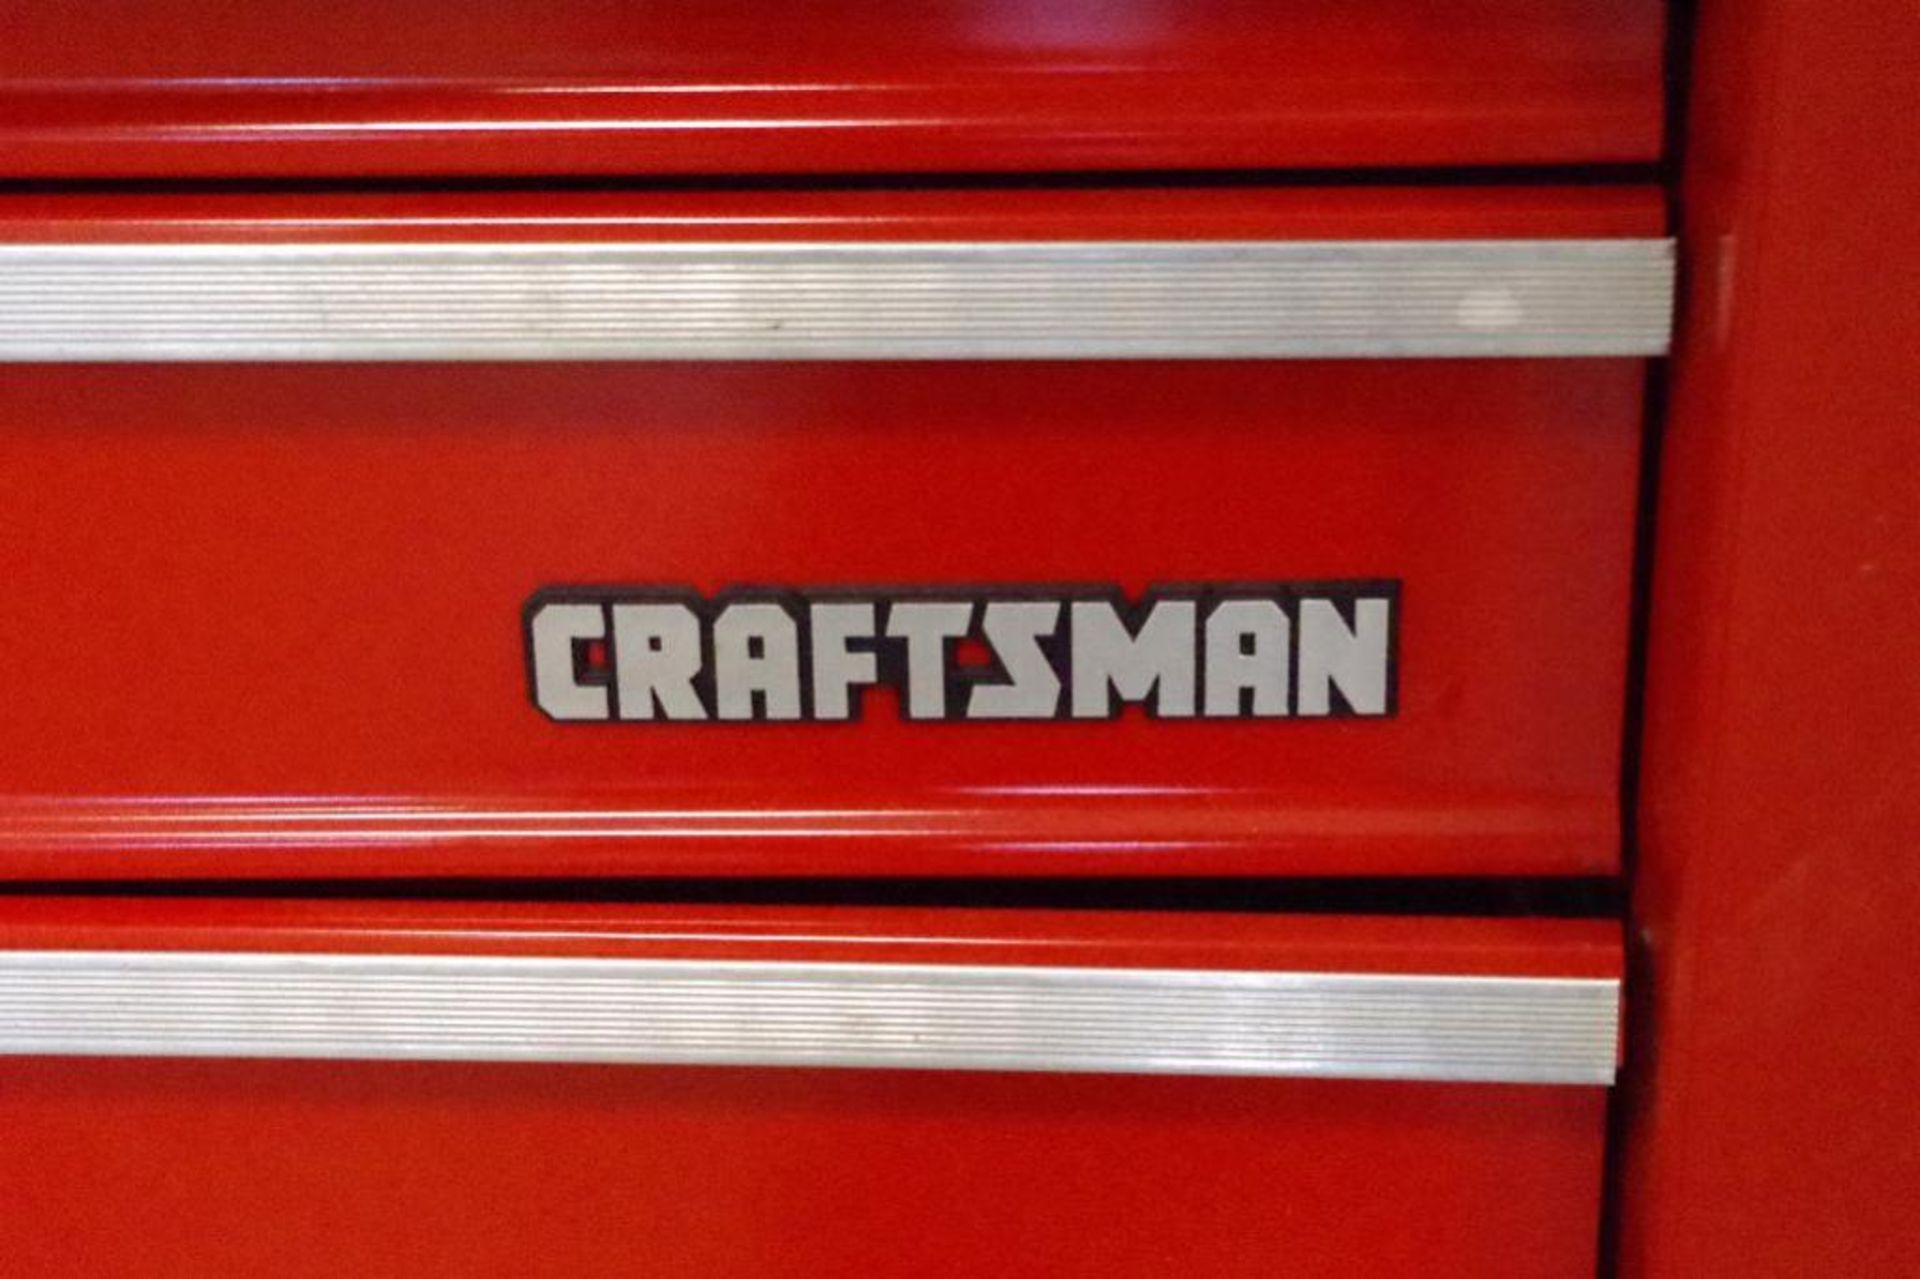 CRAFTSMAN 5-Drawer Rolling Tool Chest - Image 3 of 5